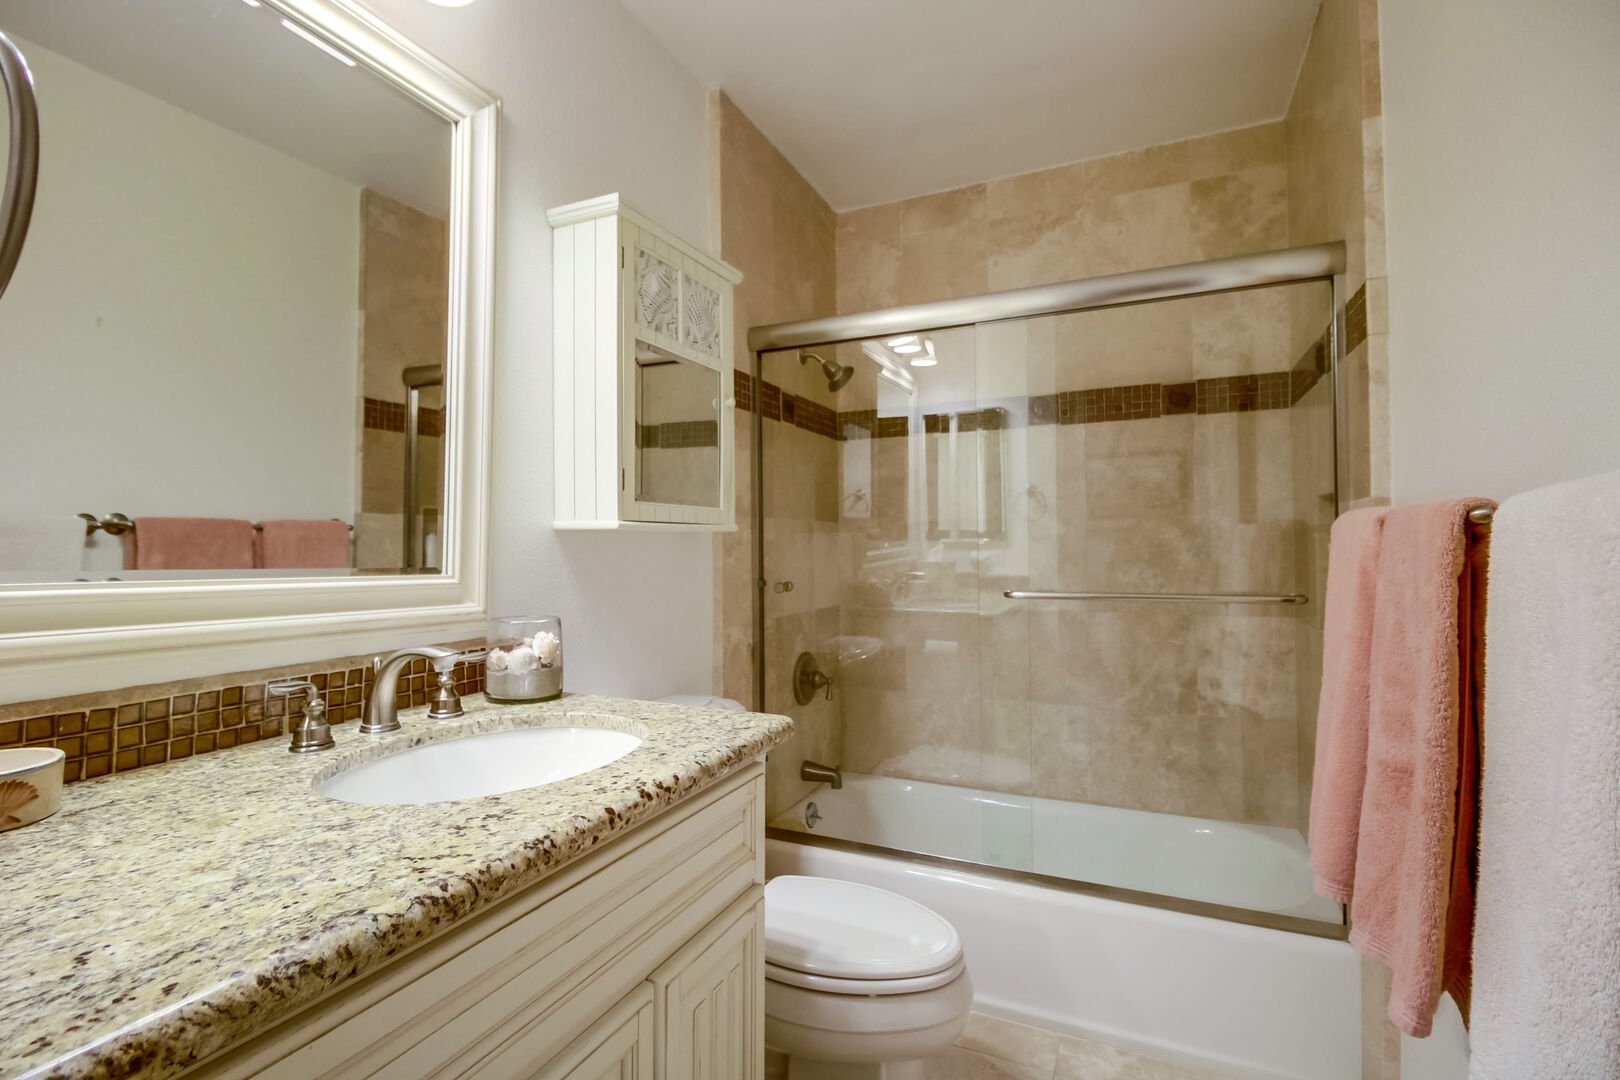 Guest bathroom with a shower/tub combo, large vanity, toilet and cabinet and drawer space